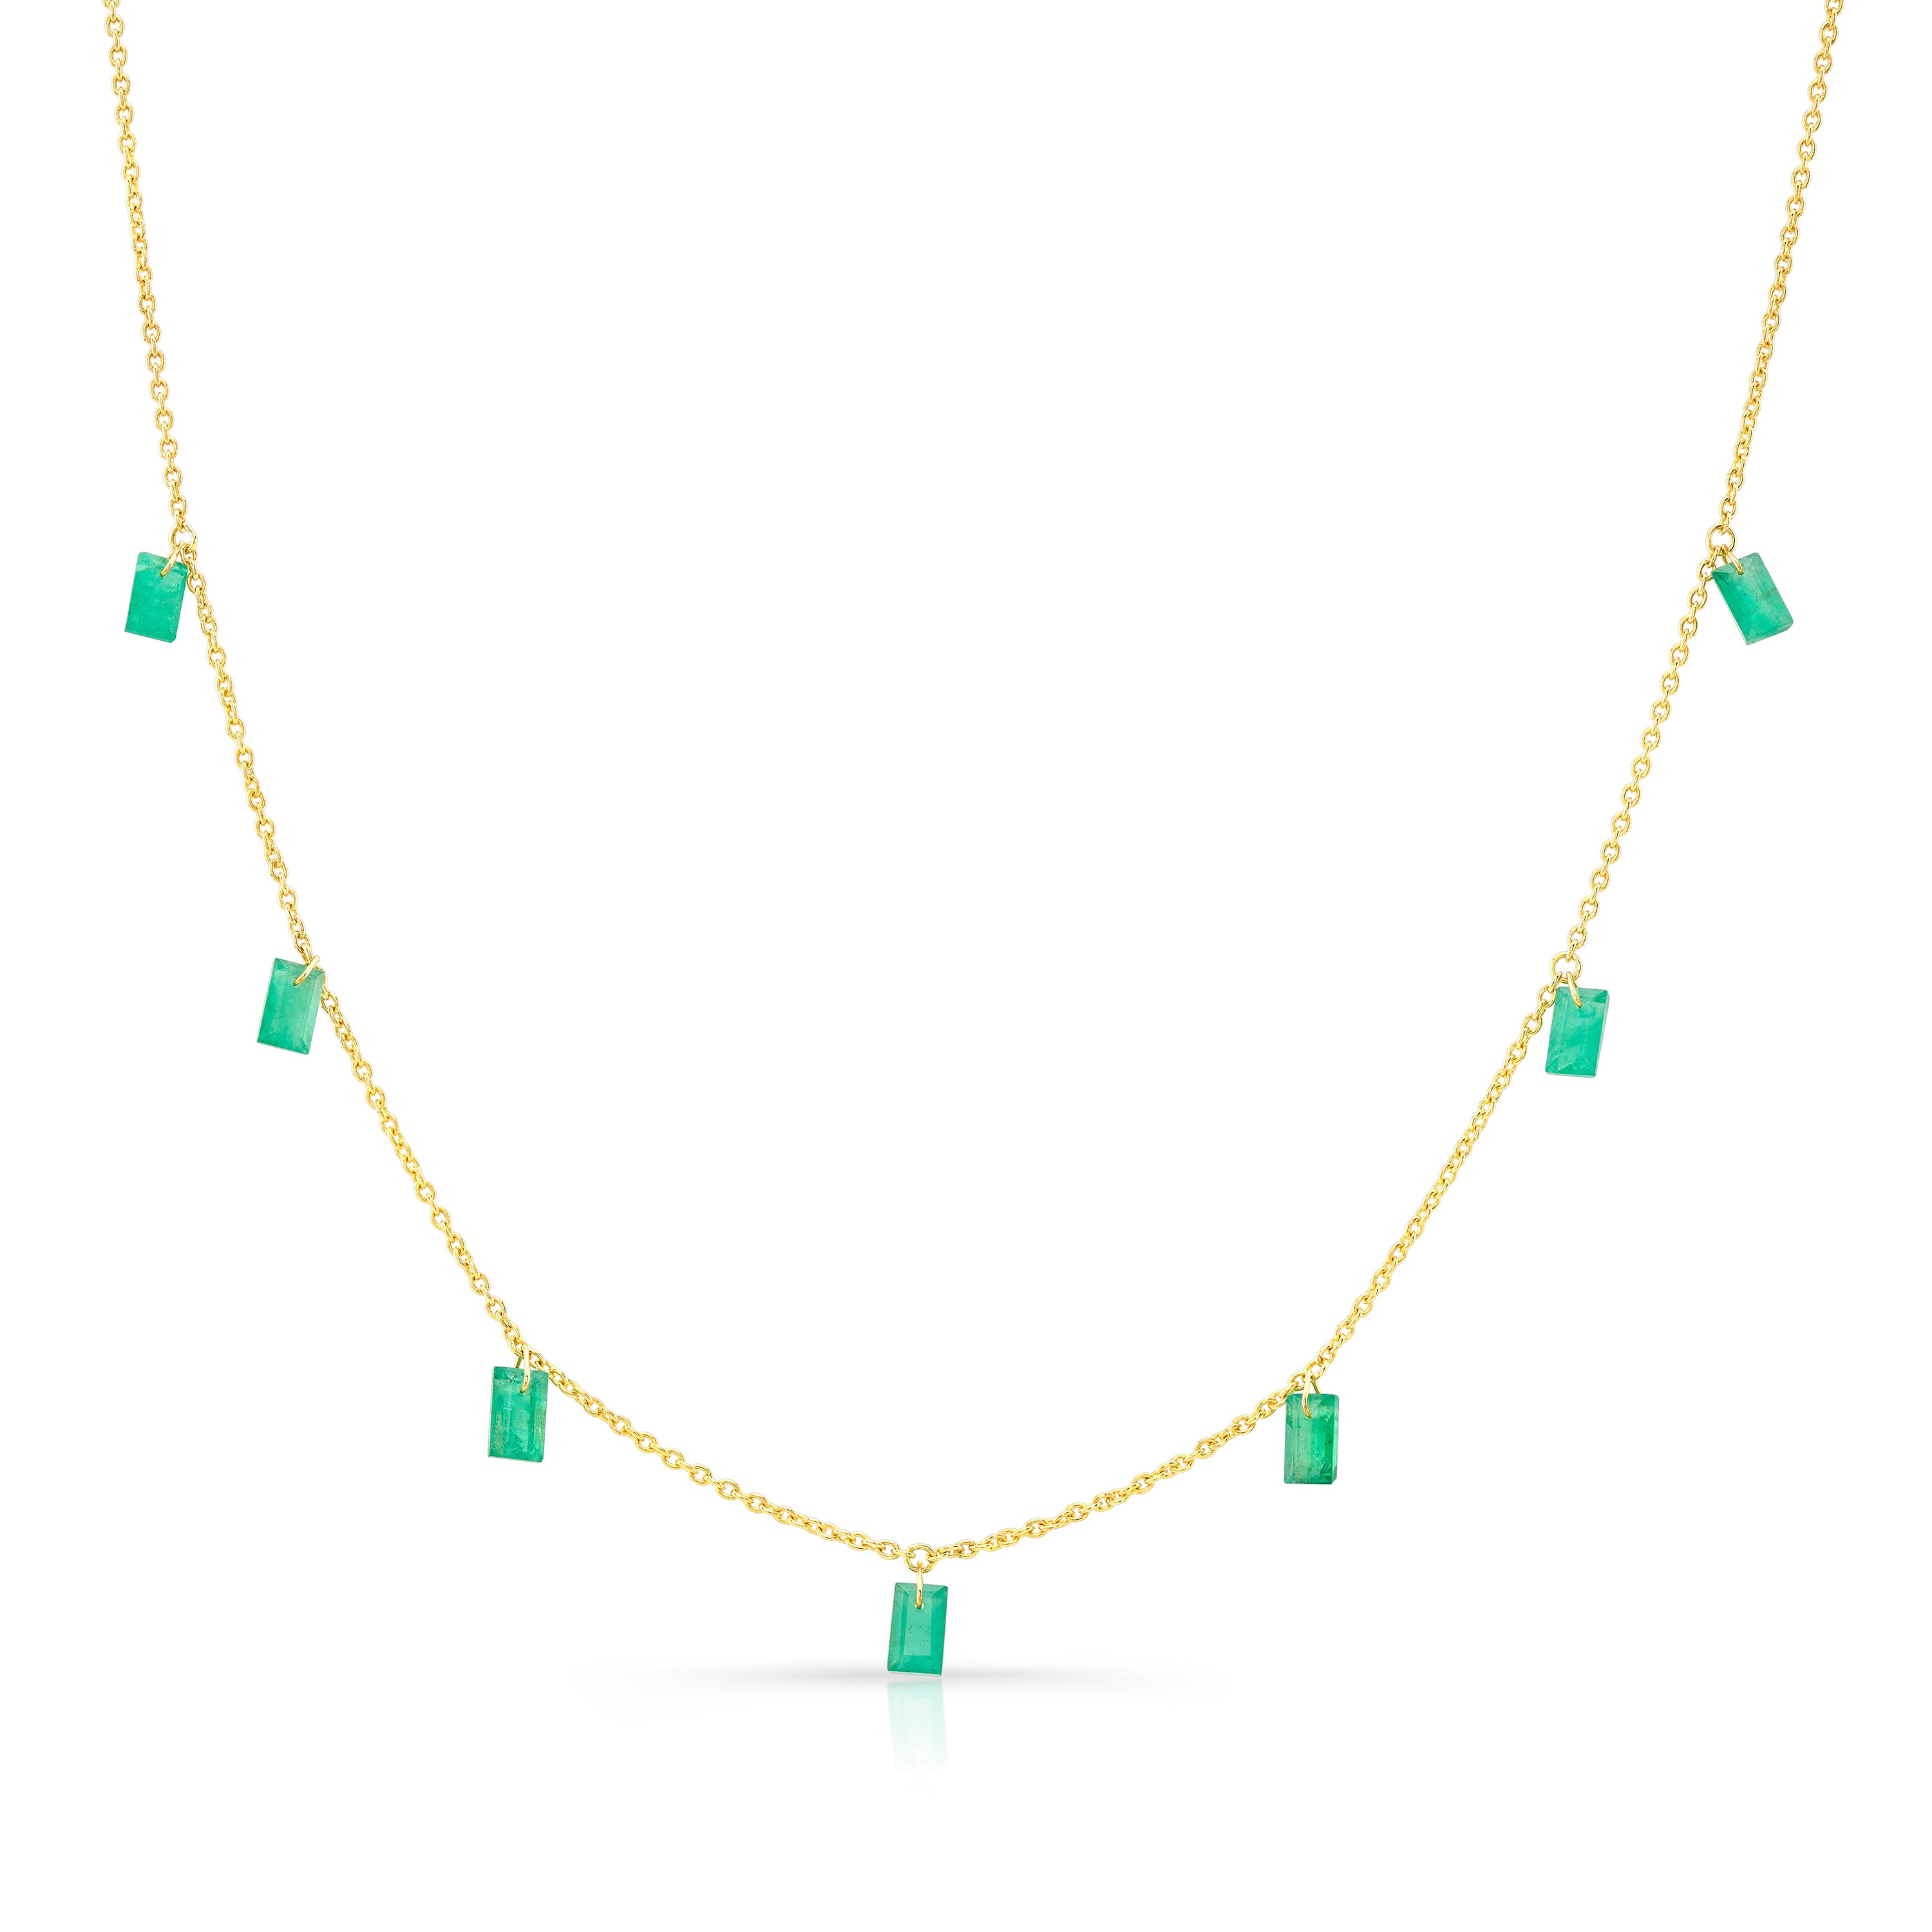 14ky gold necklace with emerald drops